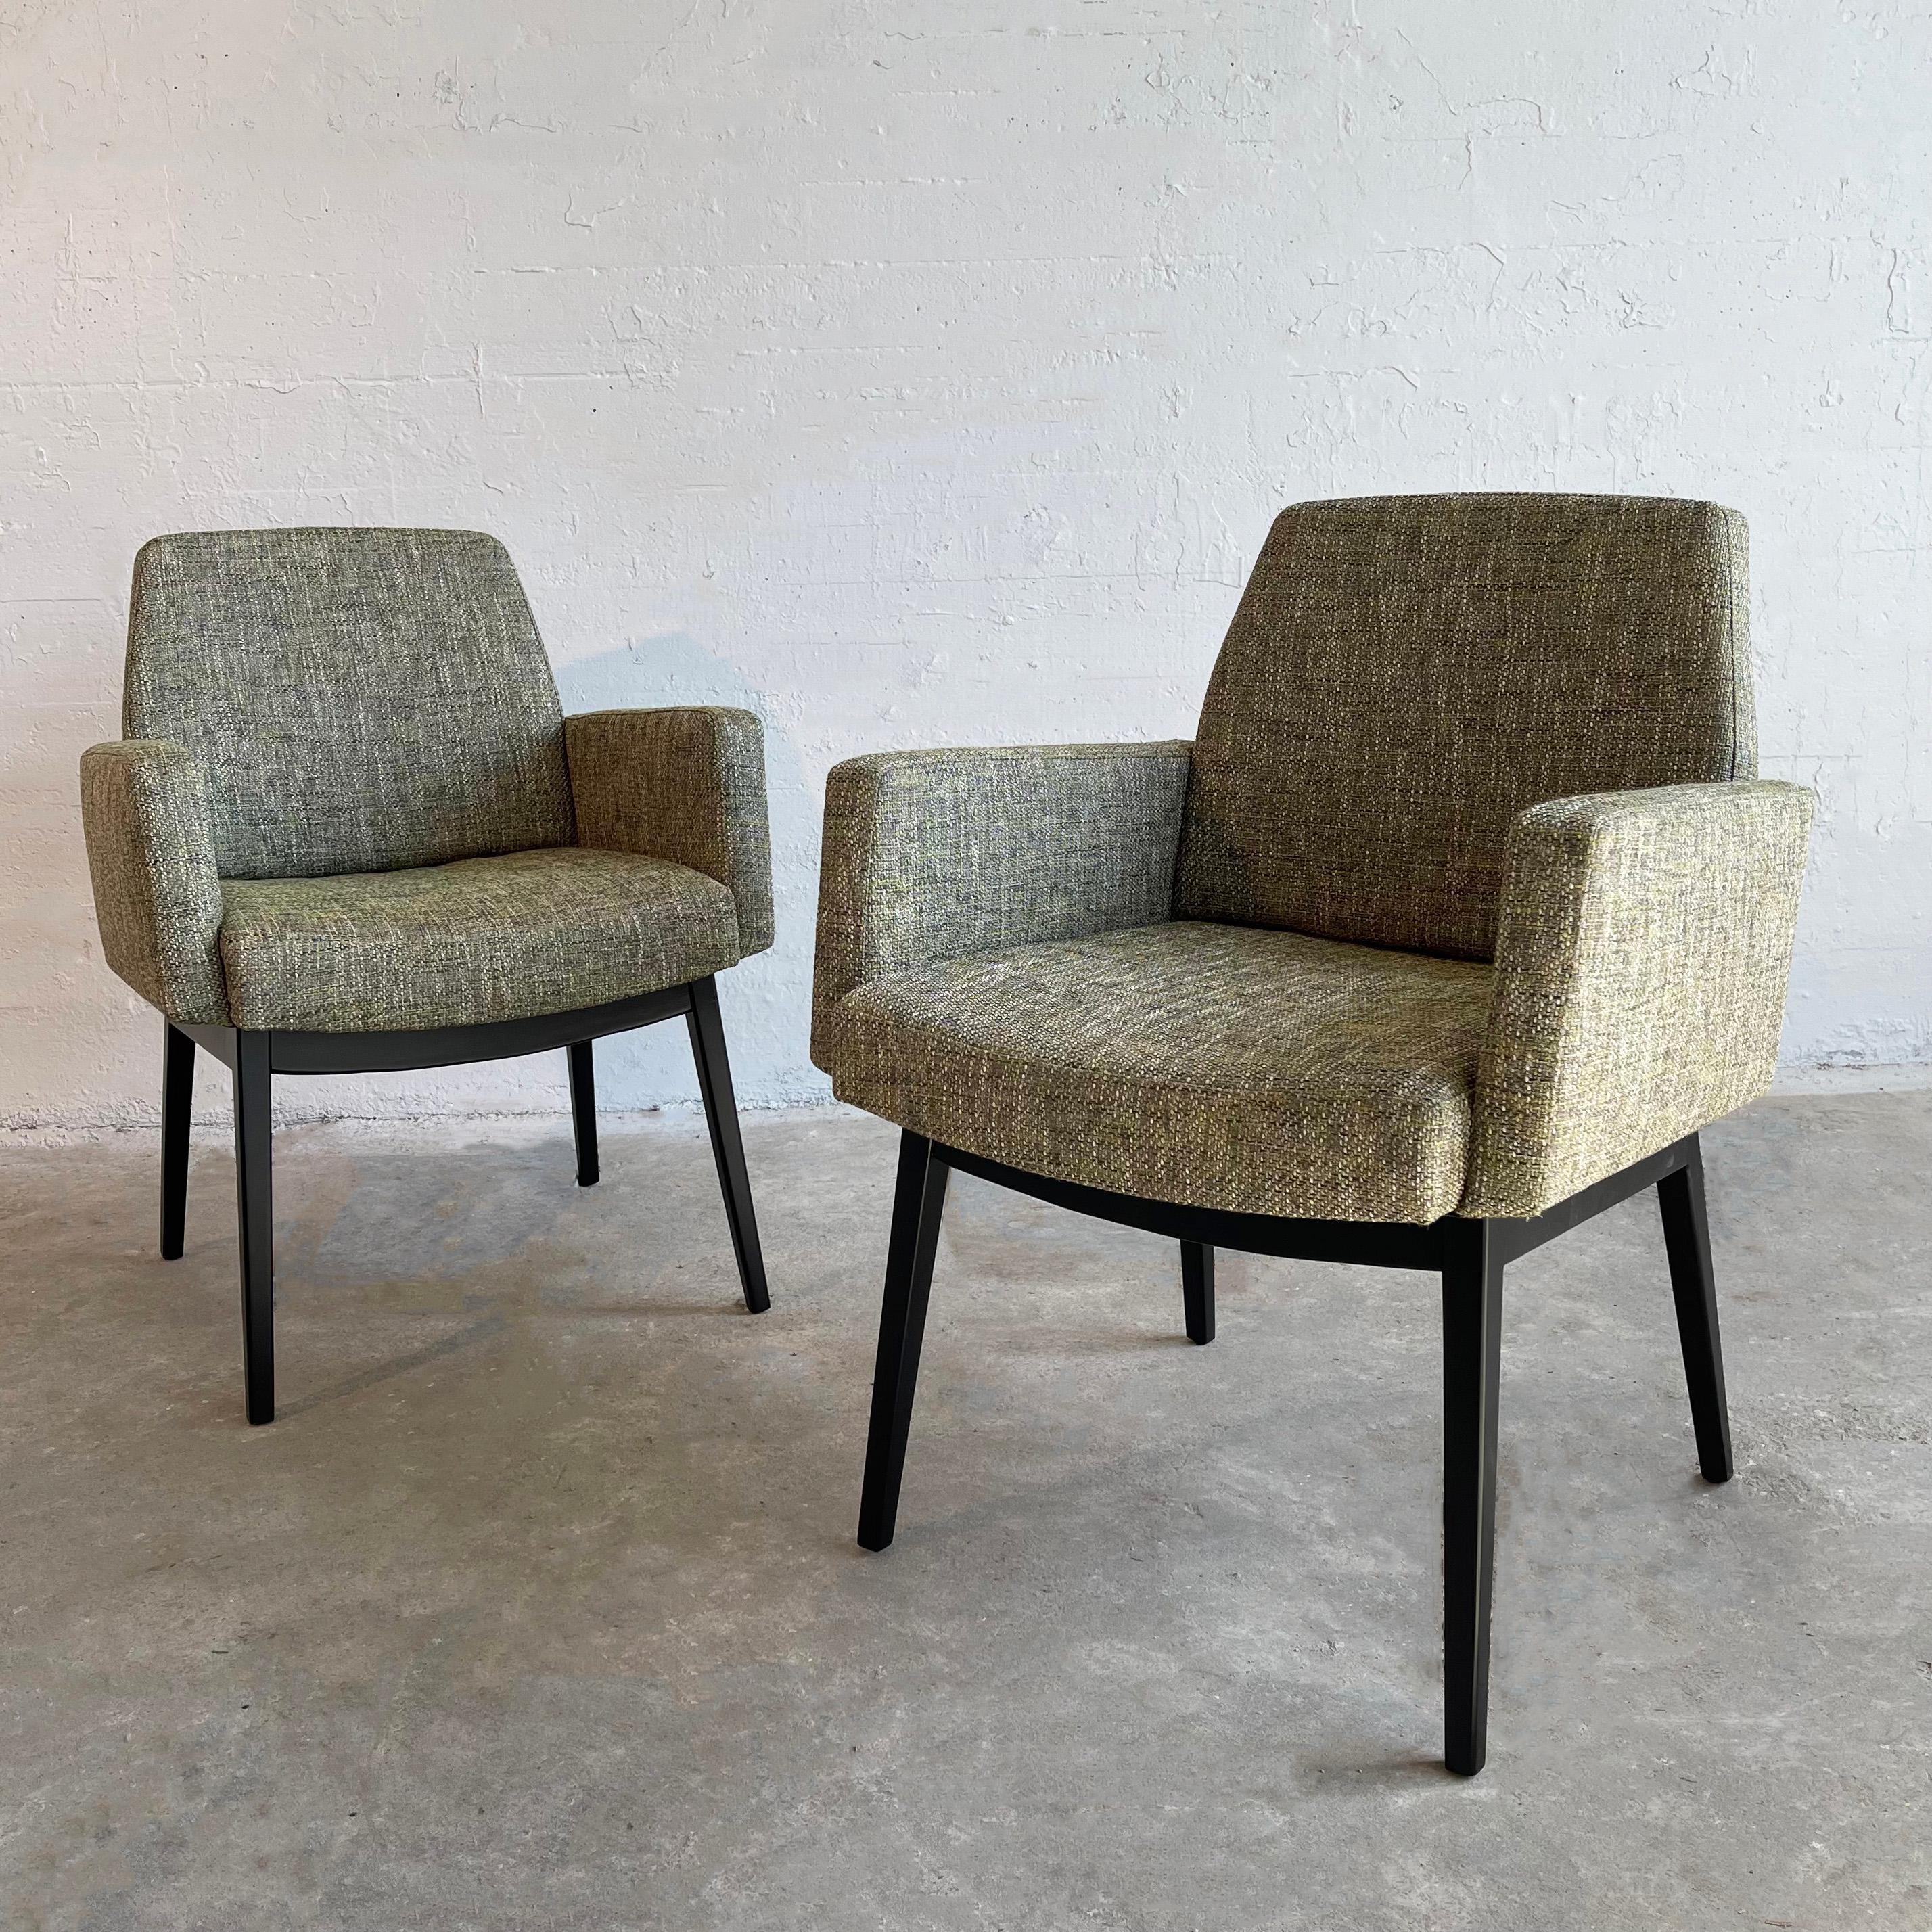 This pair of mid-century modern armchairs by Jens Risom feature lacquered walnut legs with fully upholstered bodies in moss green tweed that is in keeping with Scandinavian color trends of the period. The chairs offer the comfort of an armchair with